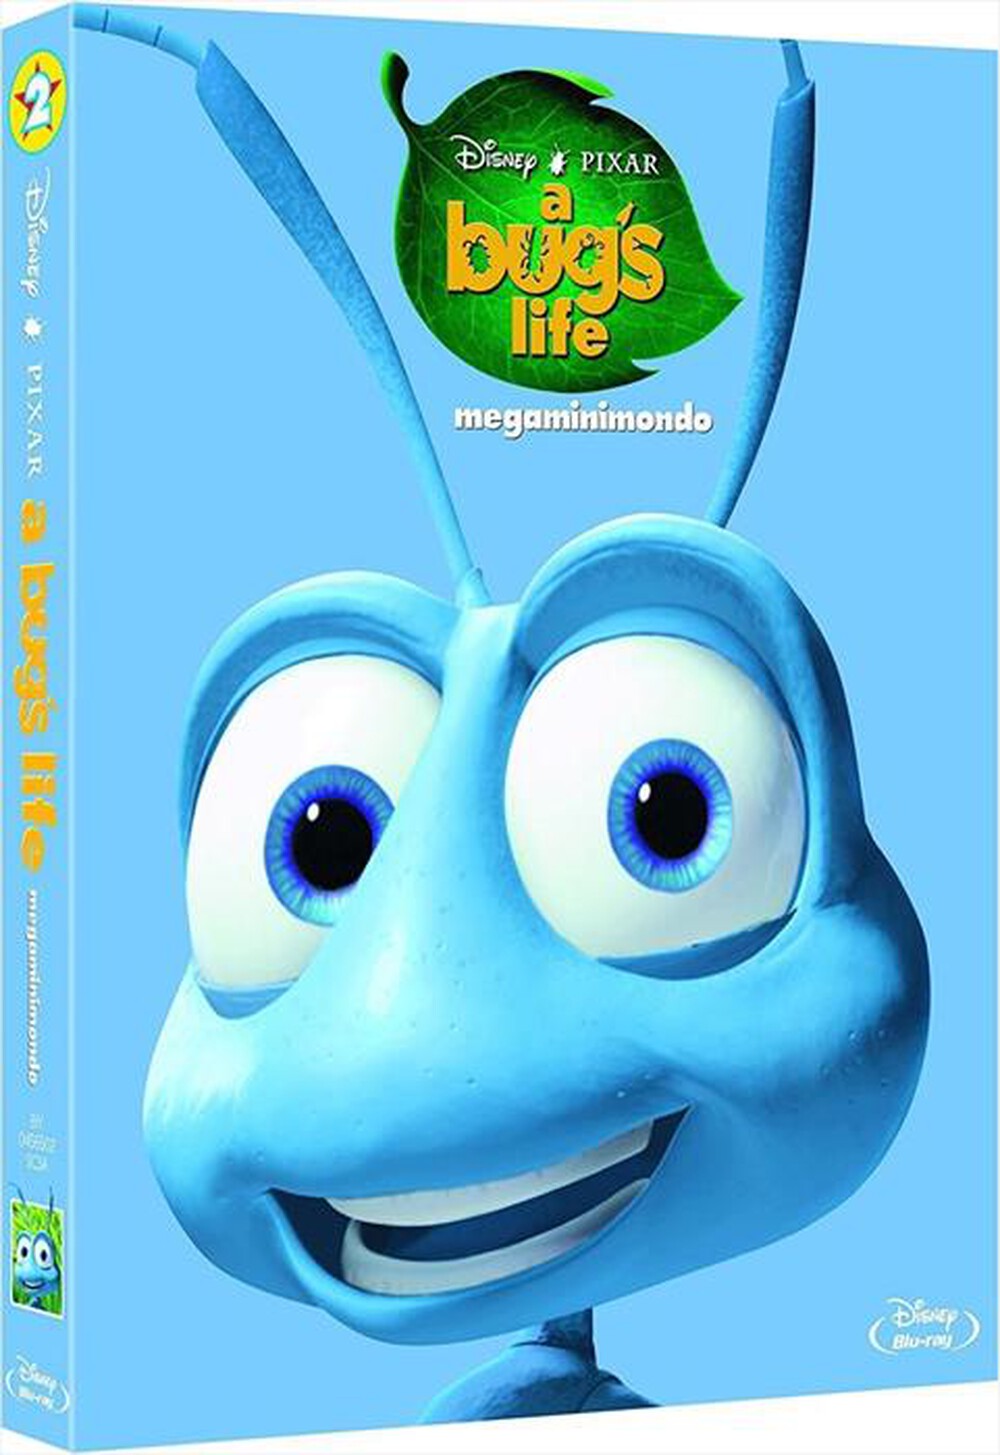 "EAGLE PICTURES - Bug's Life (A) (SE)"